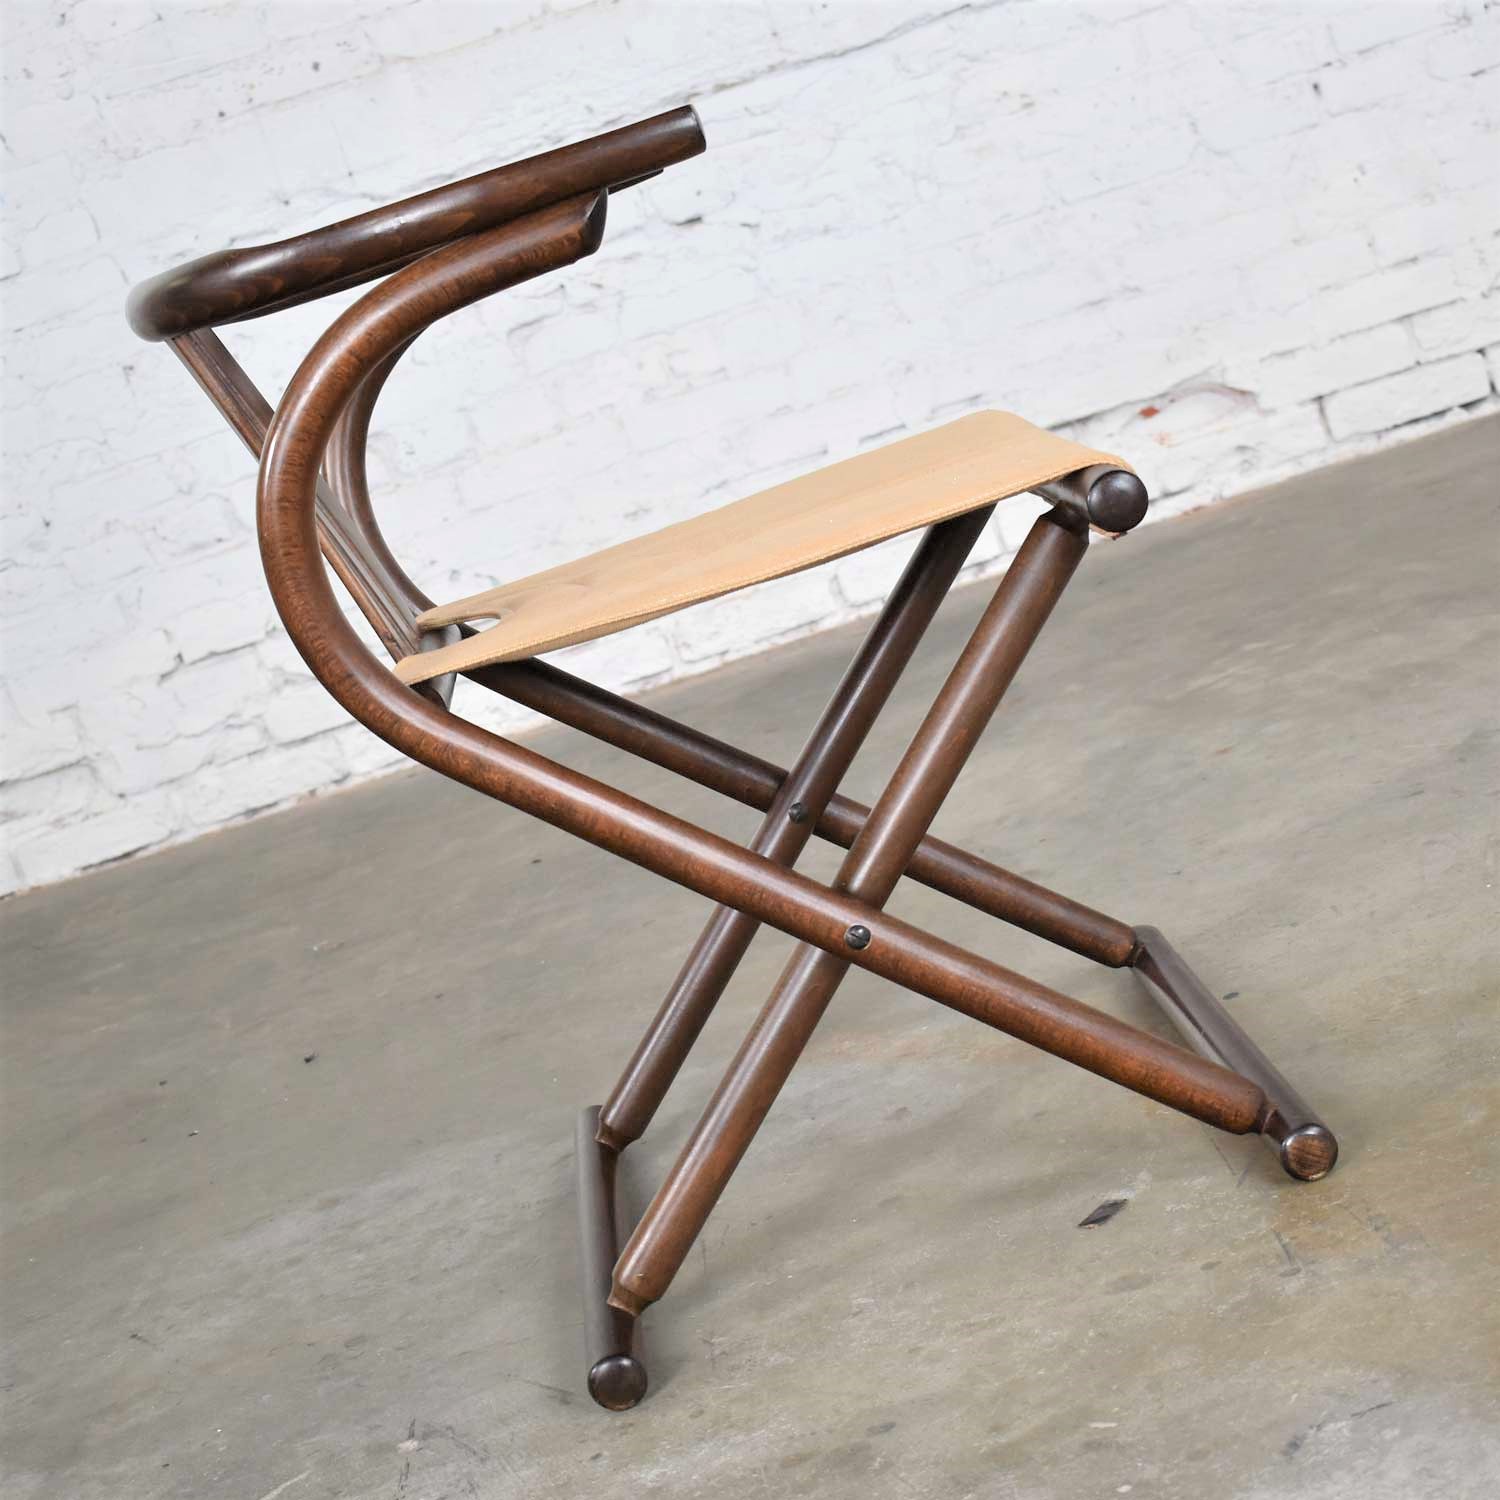 Thonet Style Bentwood Walnut Tone Folding Chair w/ Canvas Sling Seat Made in Romania